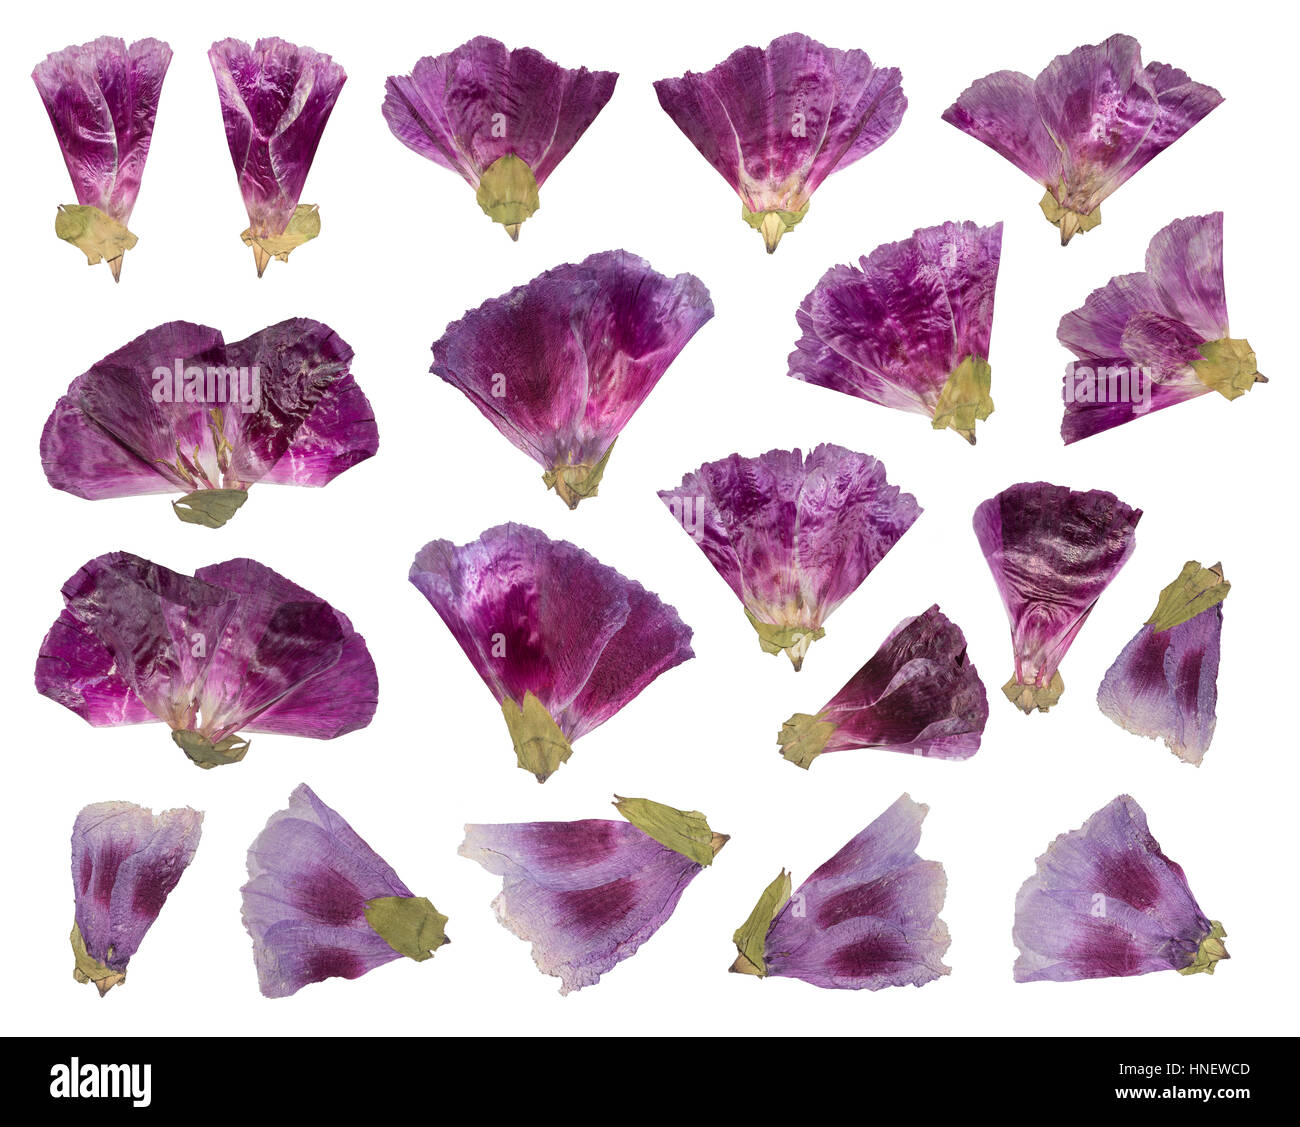 Dried and pressed flowers. Herbarium of purple flowers. Set of Godetia flower isolated Stock Photo